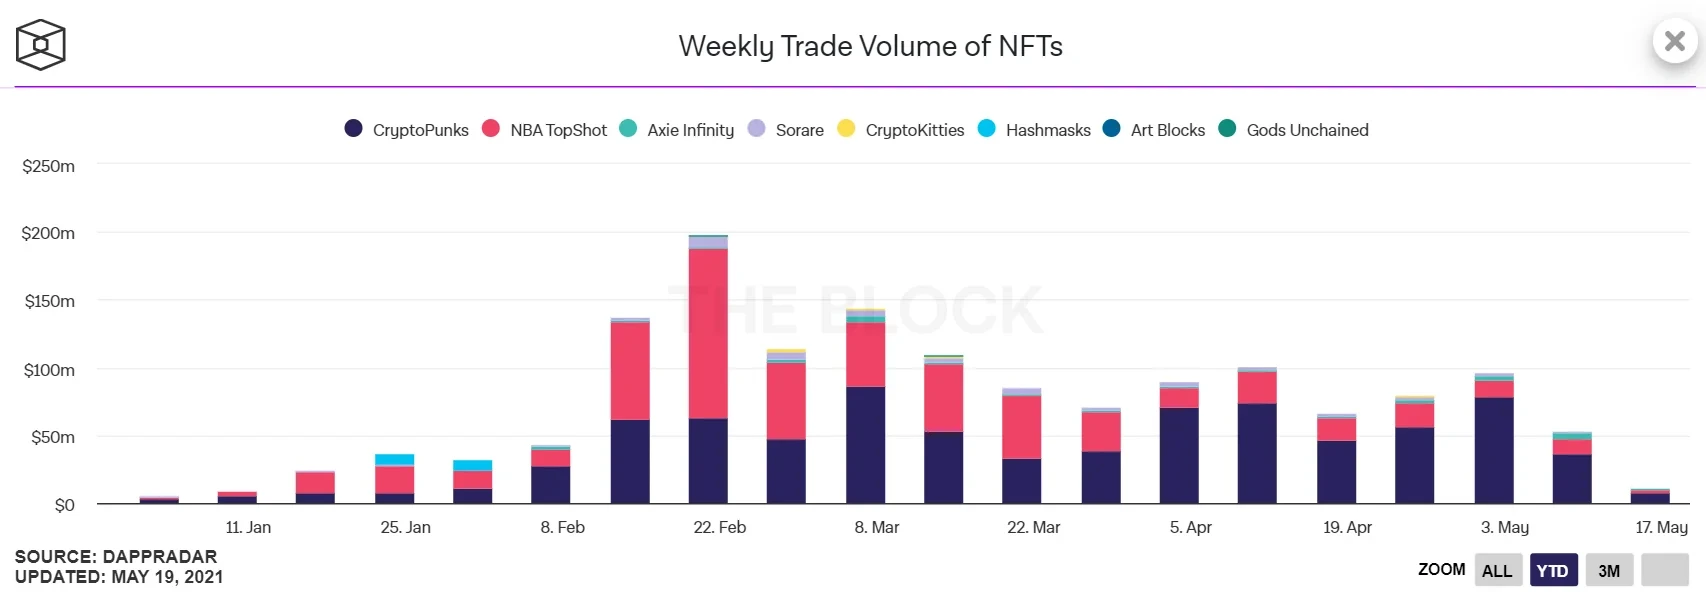 Weekly Trade Volume of NFTs